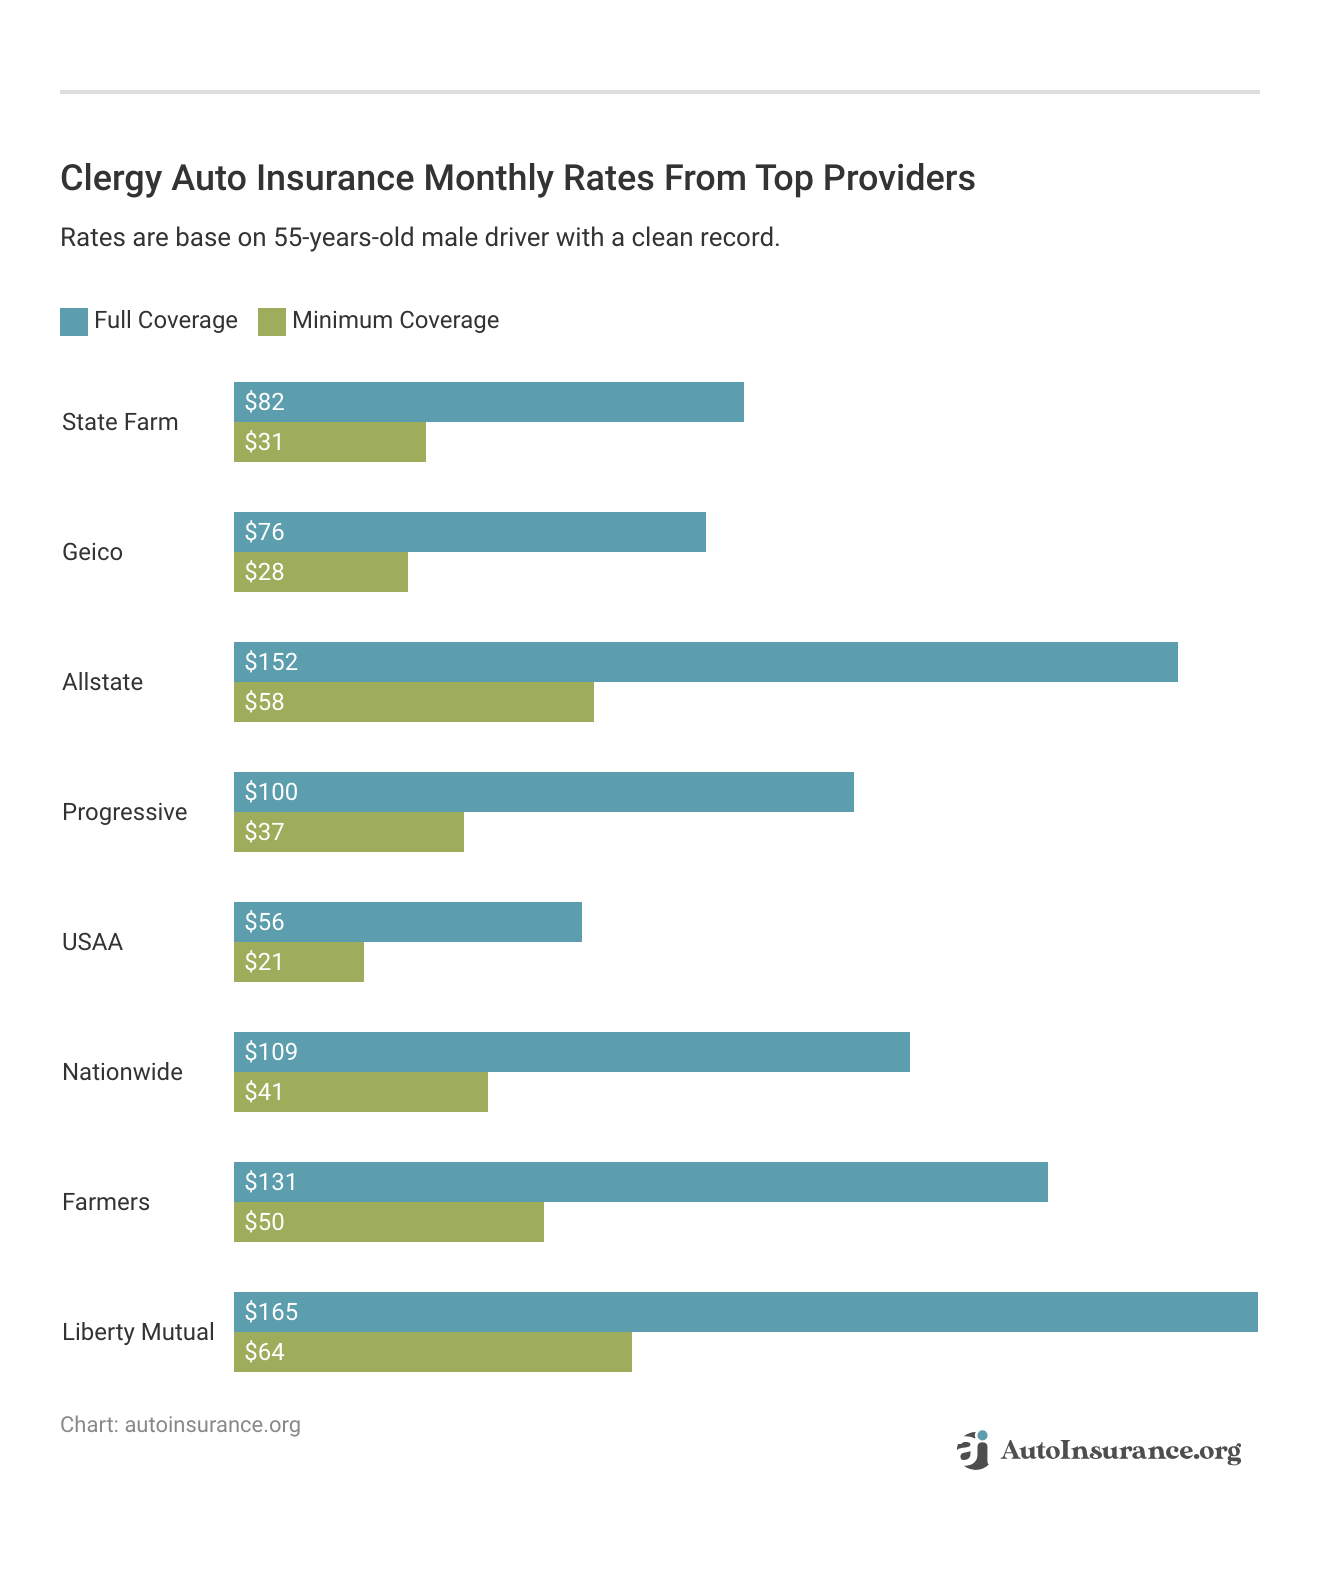 <h3>Clergy Auto Insurance Monthly Rates From Top Providers</h3>